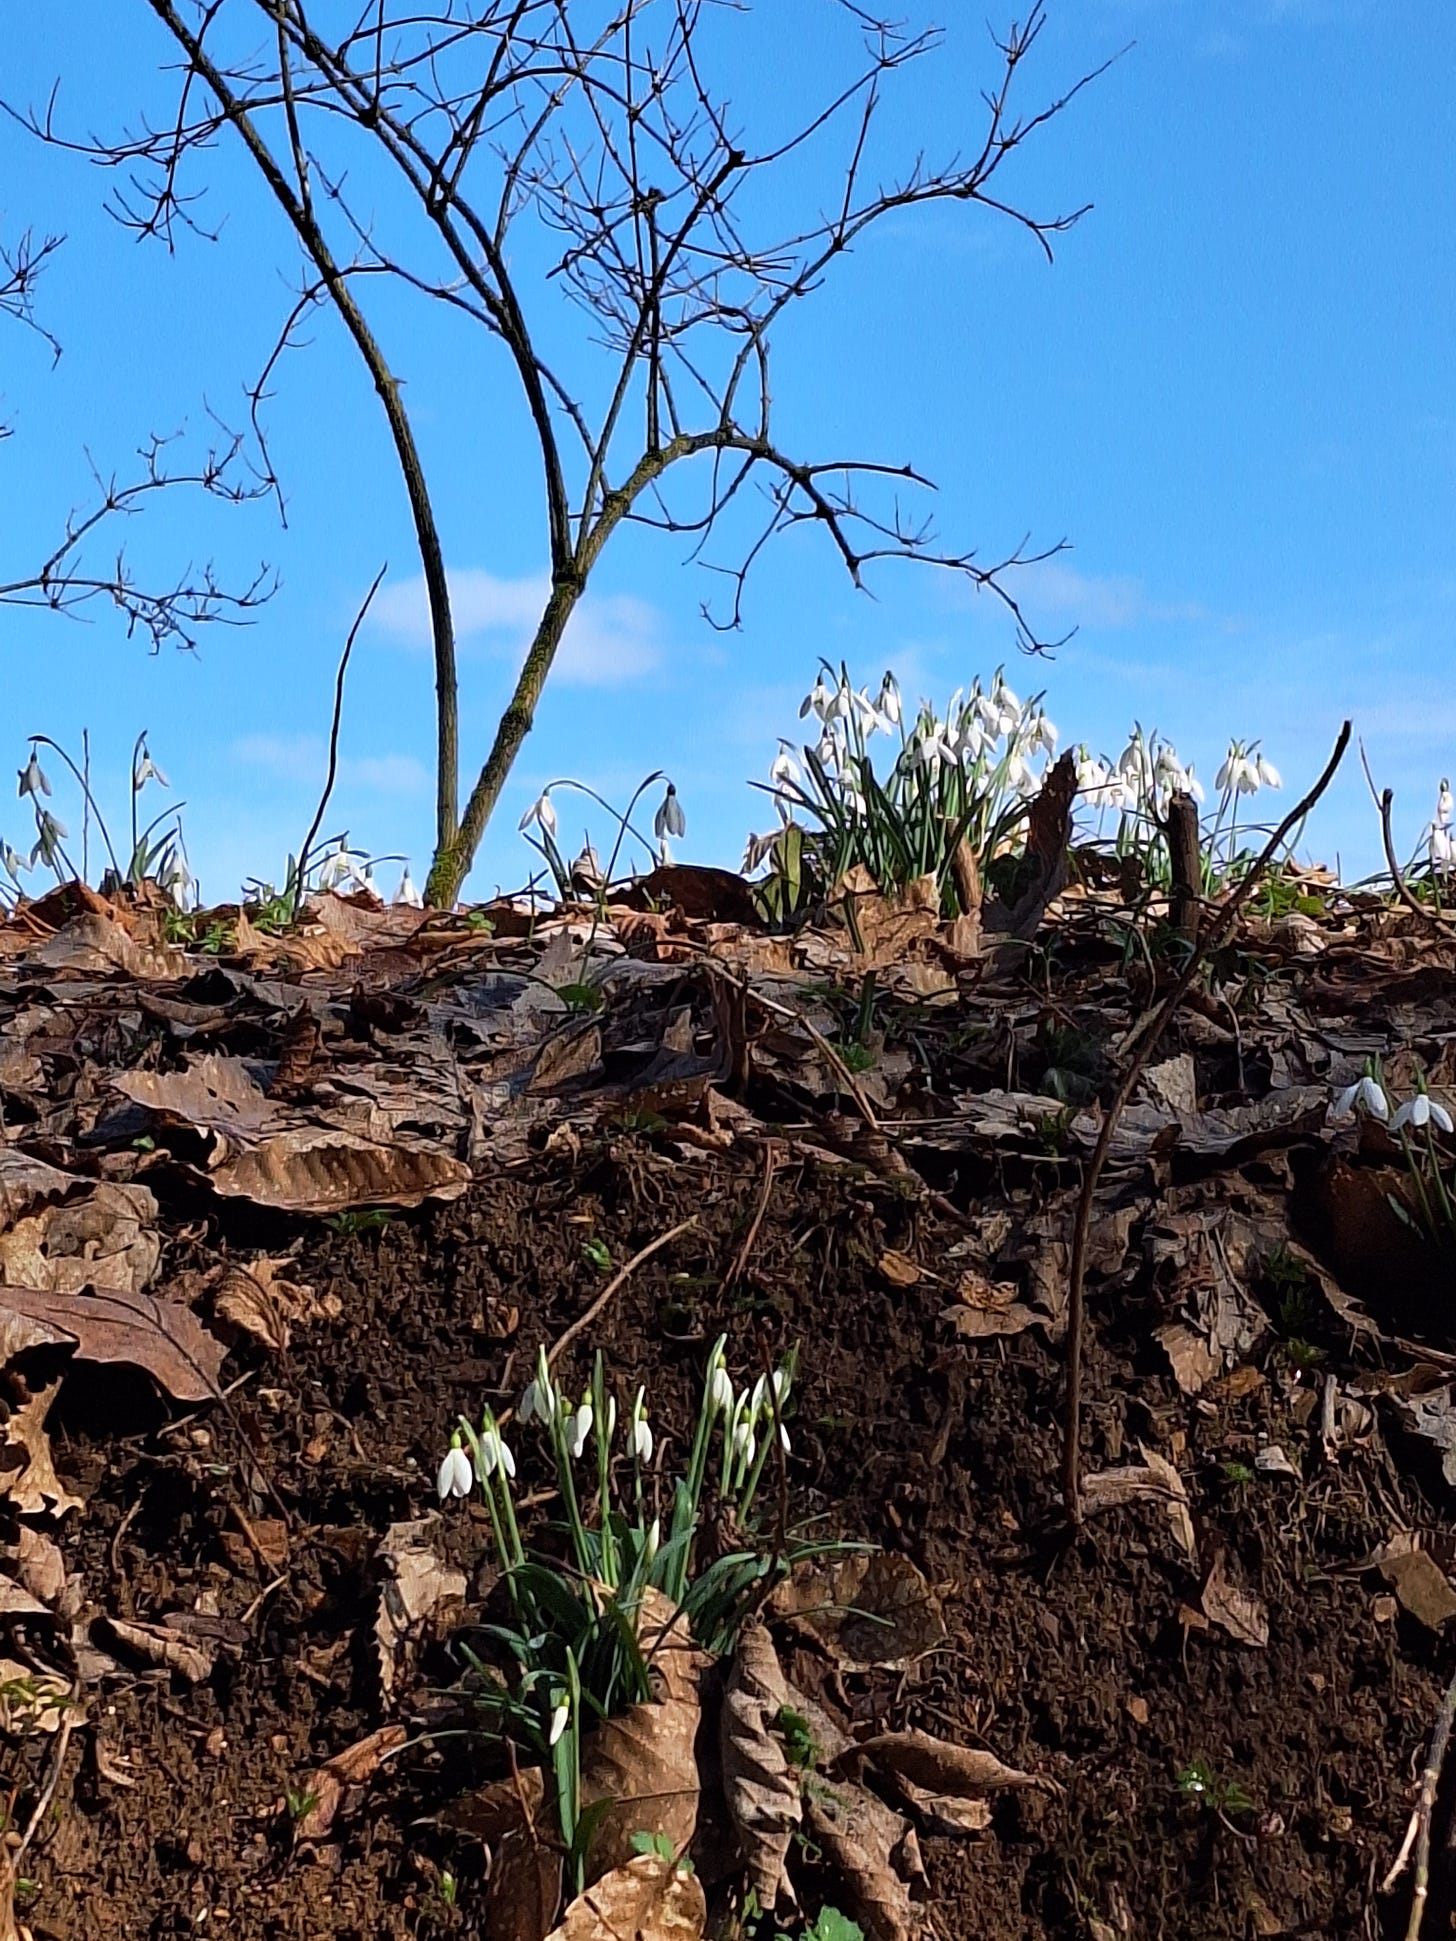 Snowdrops blooming on a earthy bank with brown winter leaves.  A blue sky and bare winter tree in the background.